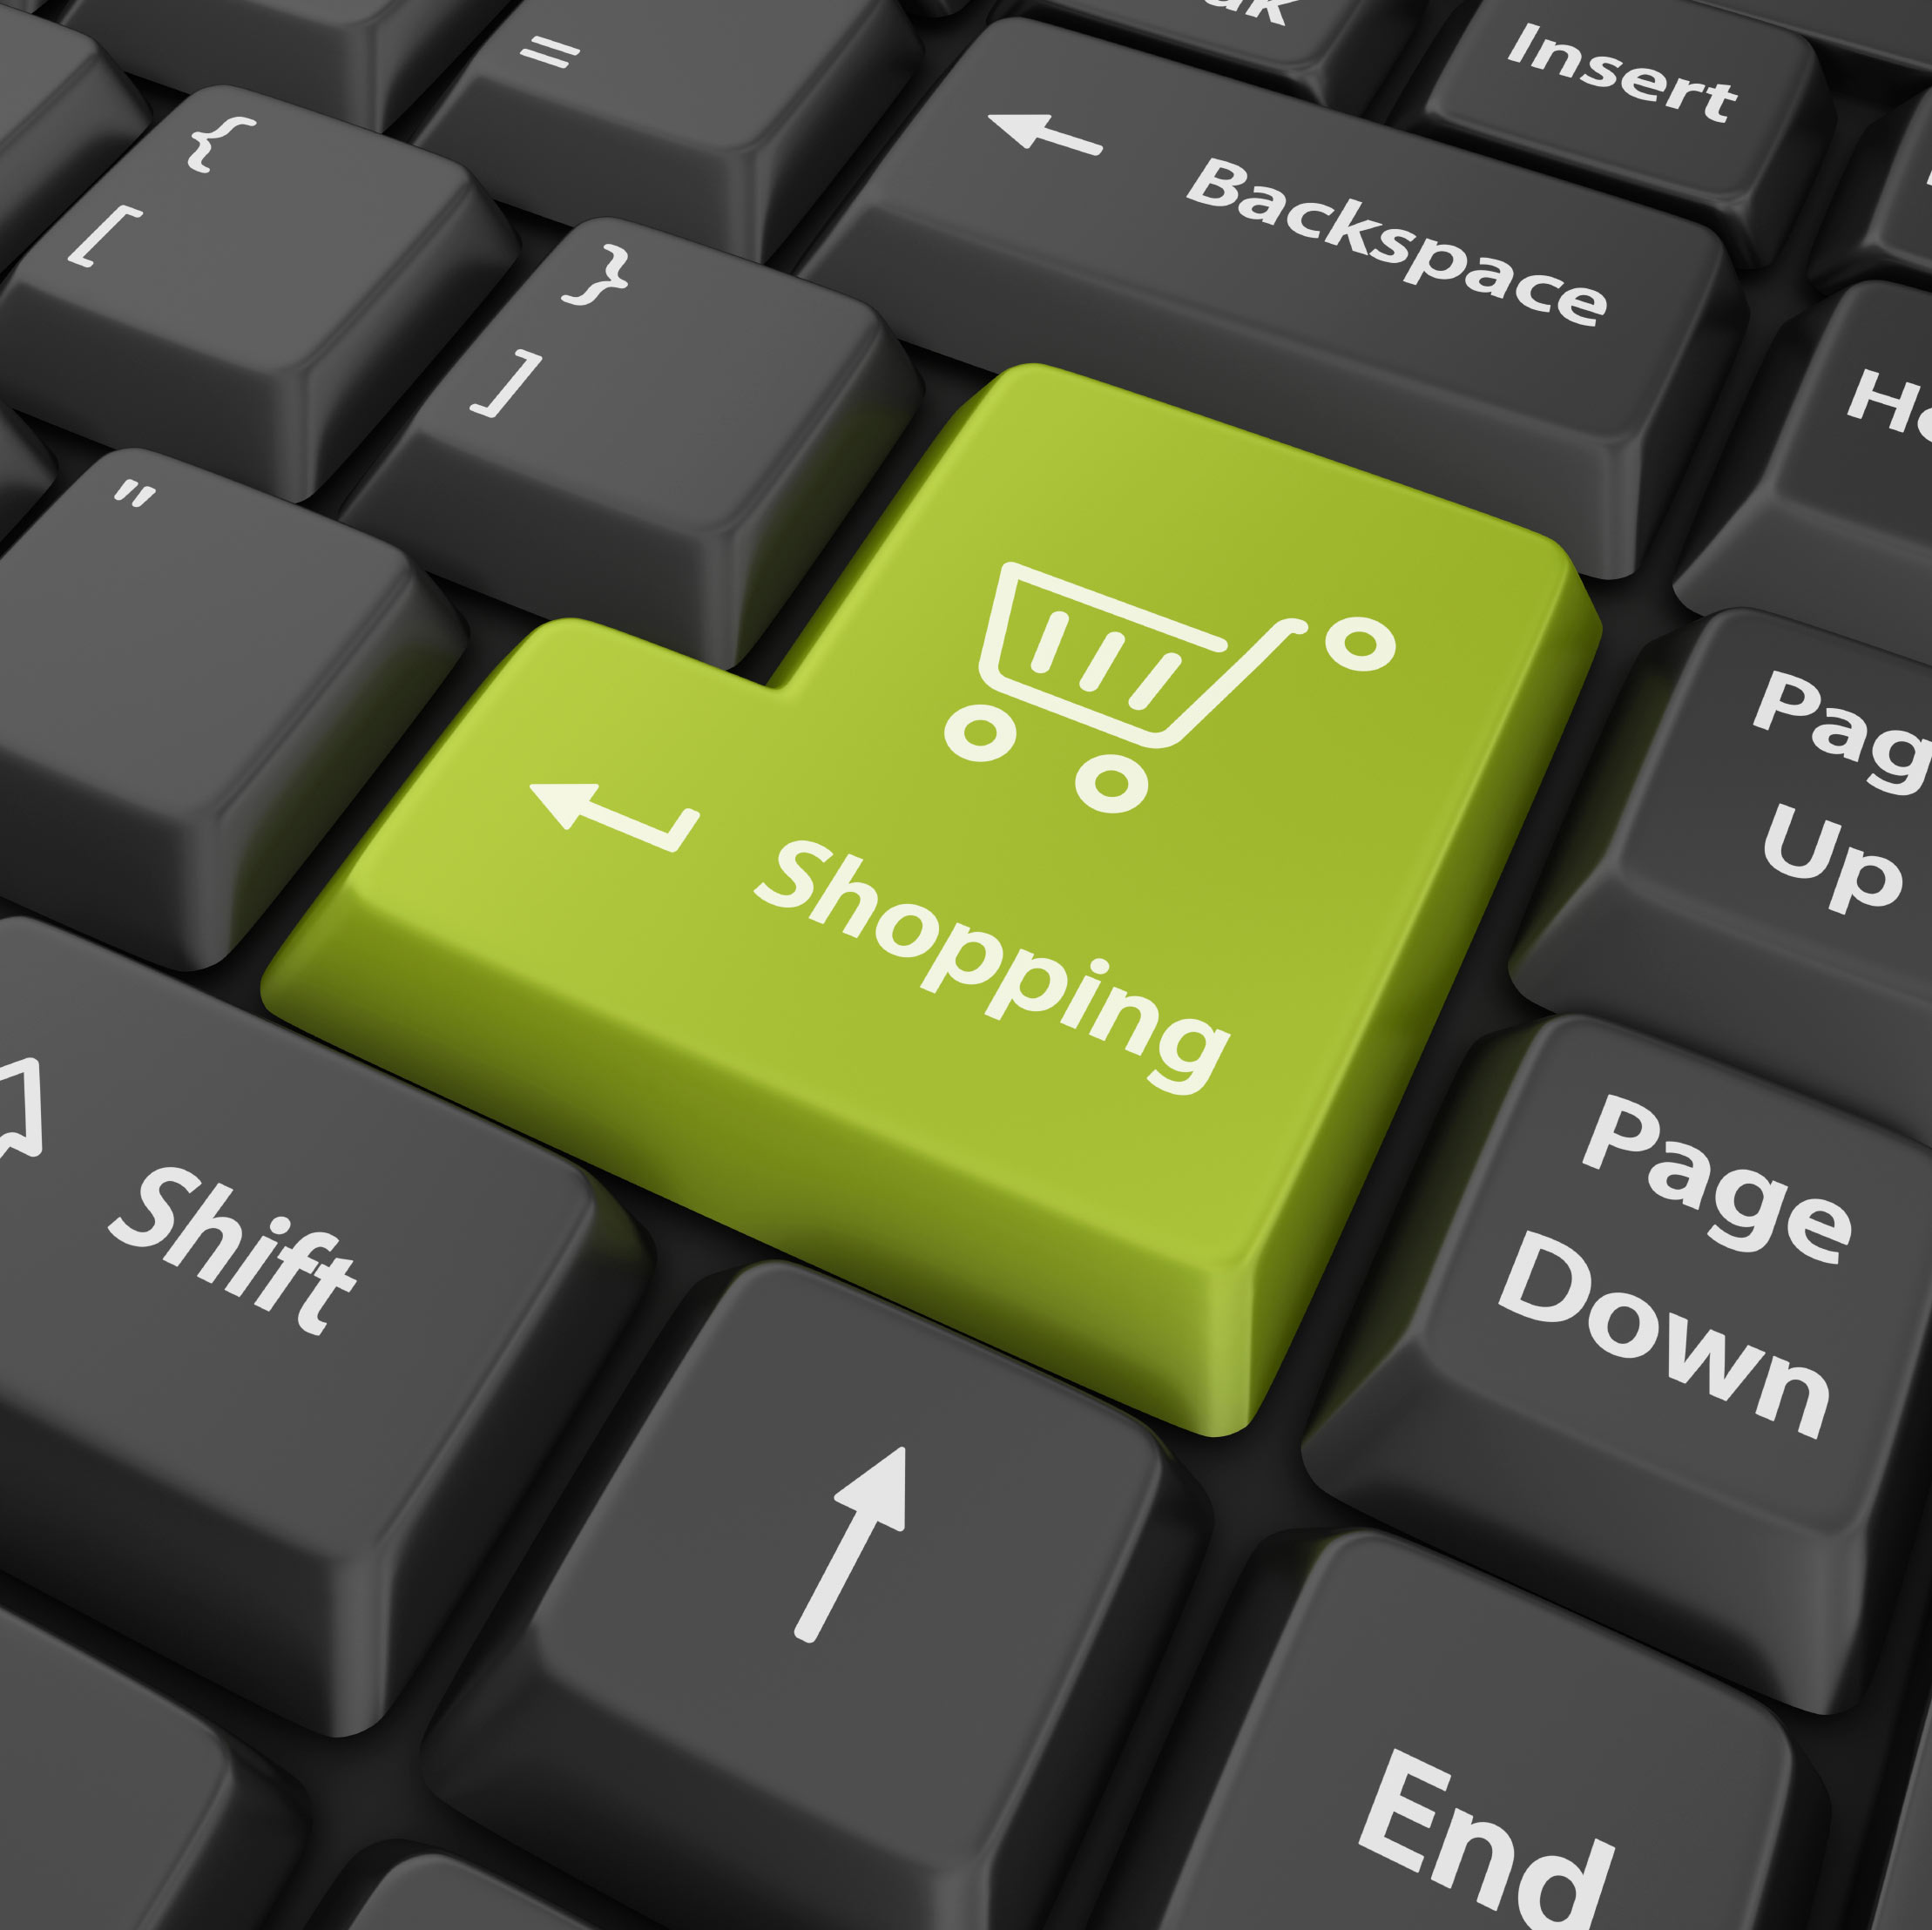 Research & Online Shopping Service